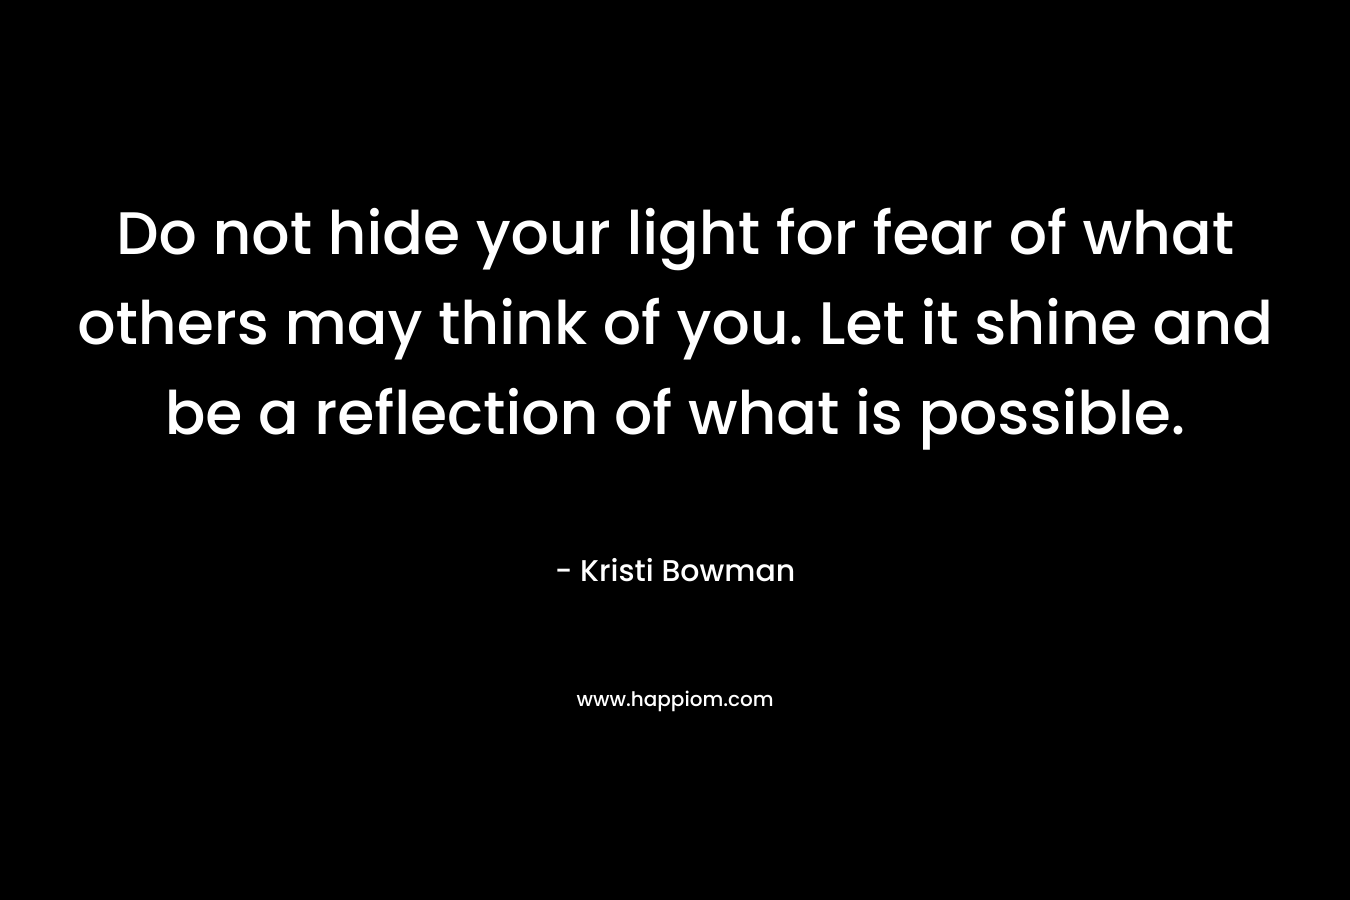 Do not hide your light for fear of what others may think of you. Let it shine and be a reflection of what is possible. – Kristi Bowman